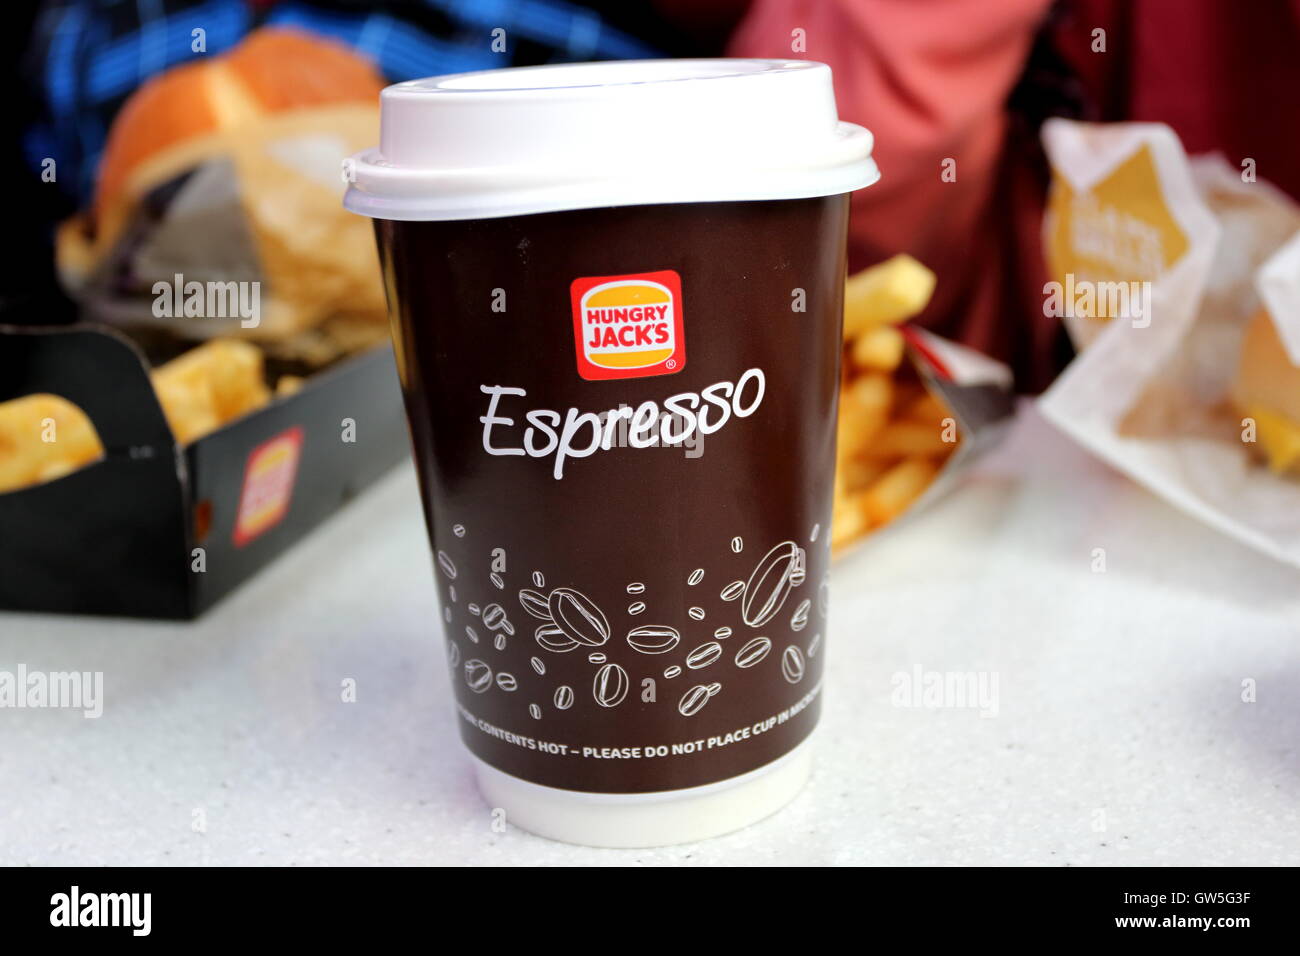 Expresso Coffee at Hungry Jacks fast food restaurant Stock ...